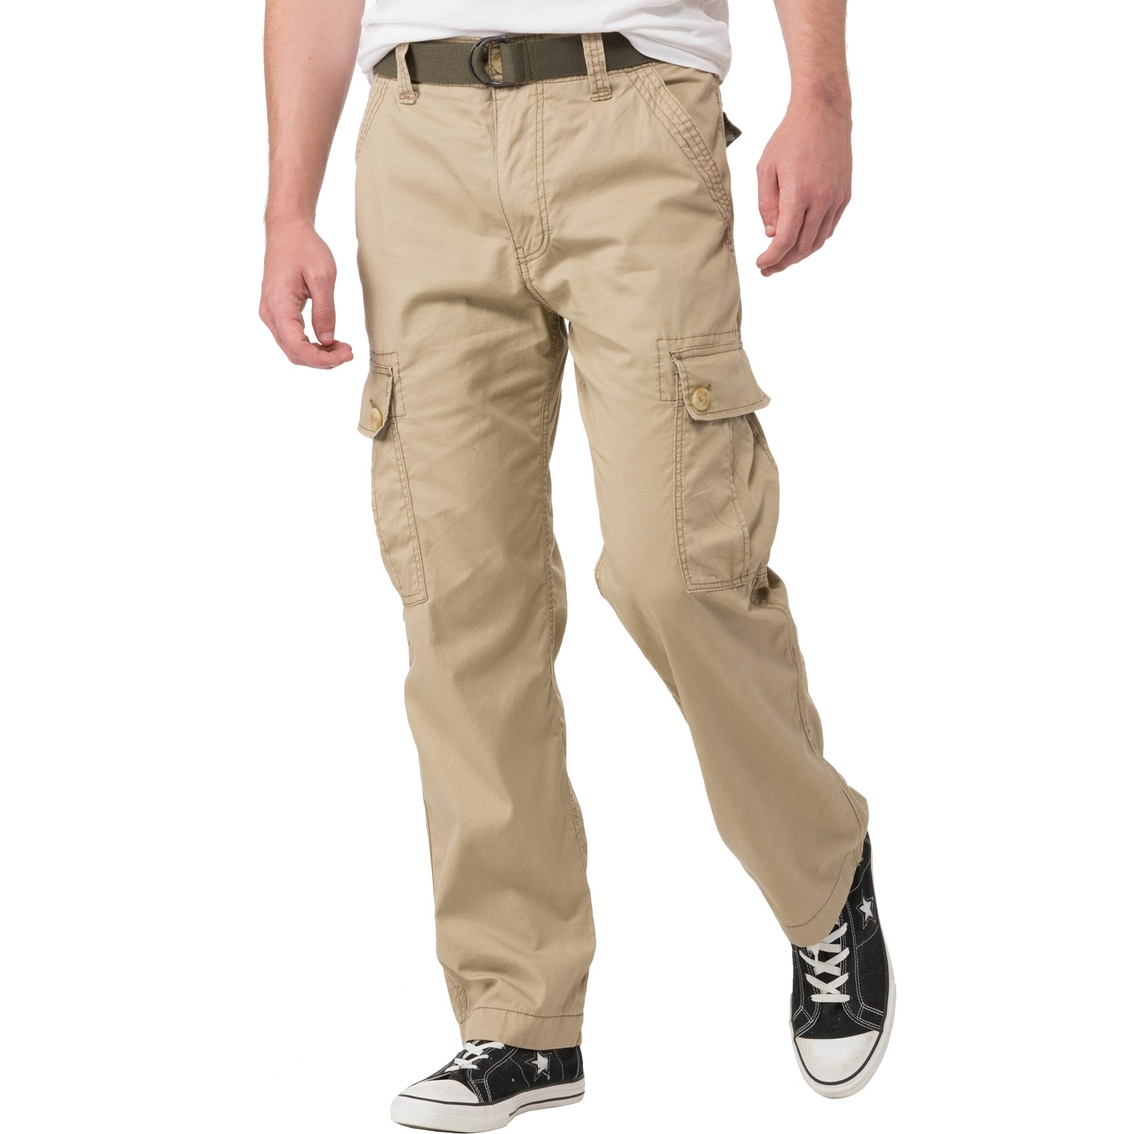 Wearfirst Belted Cargo Pants | Pants | Clothing & Accessories | Shop ...